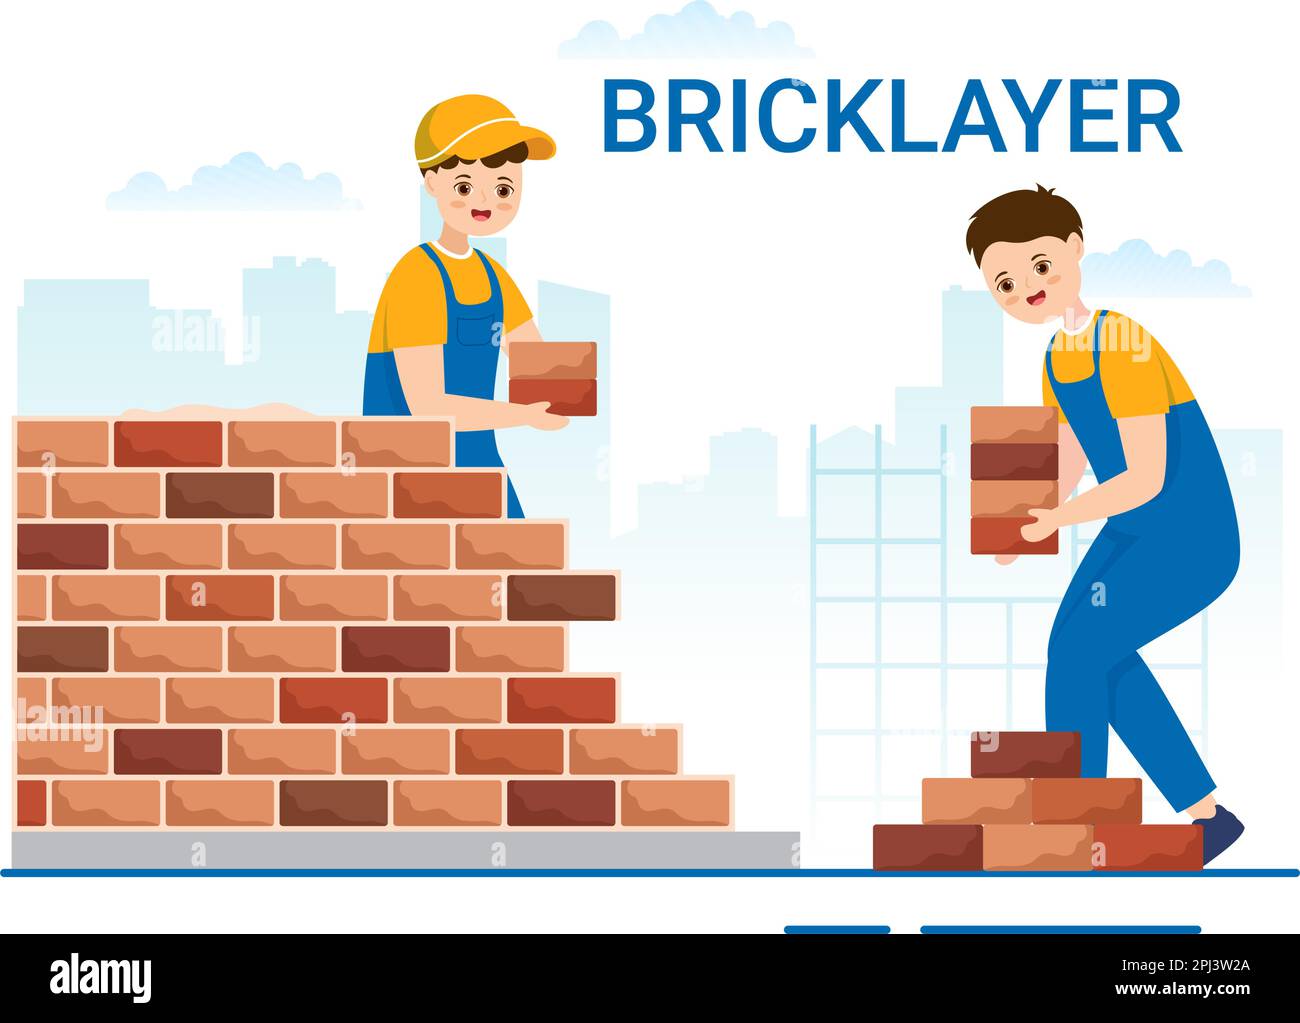 Bricklayer Worker Illustration with People Construction and Laying Bricks for Building a Wall in Flat Cartoon Hand Drawn Landing Page Templates Stock Vector